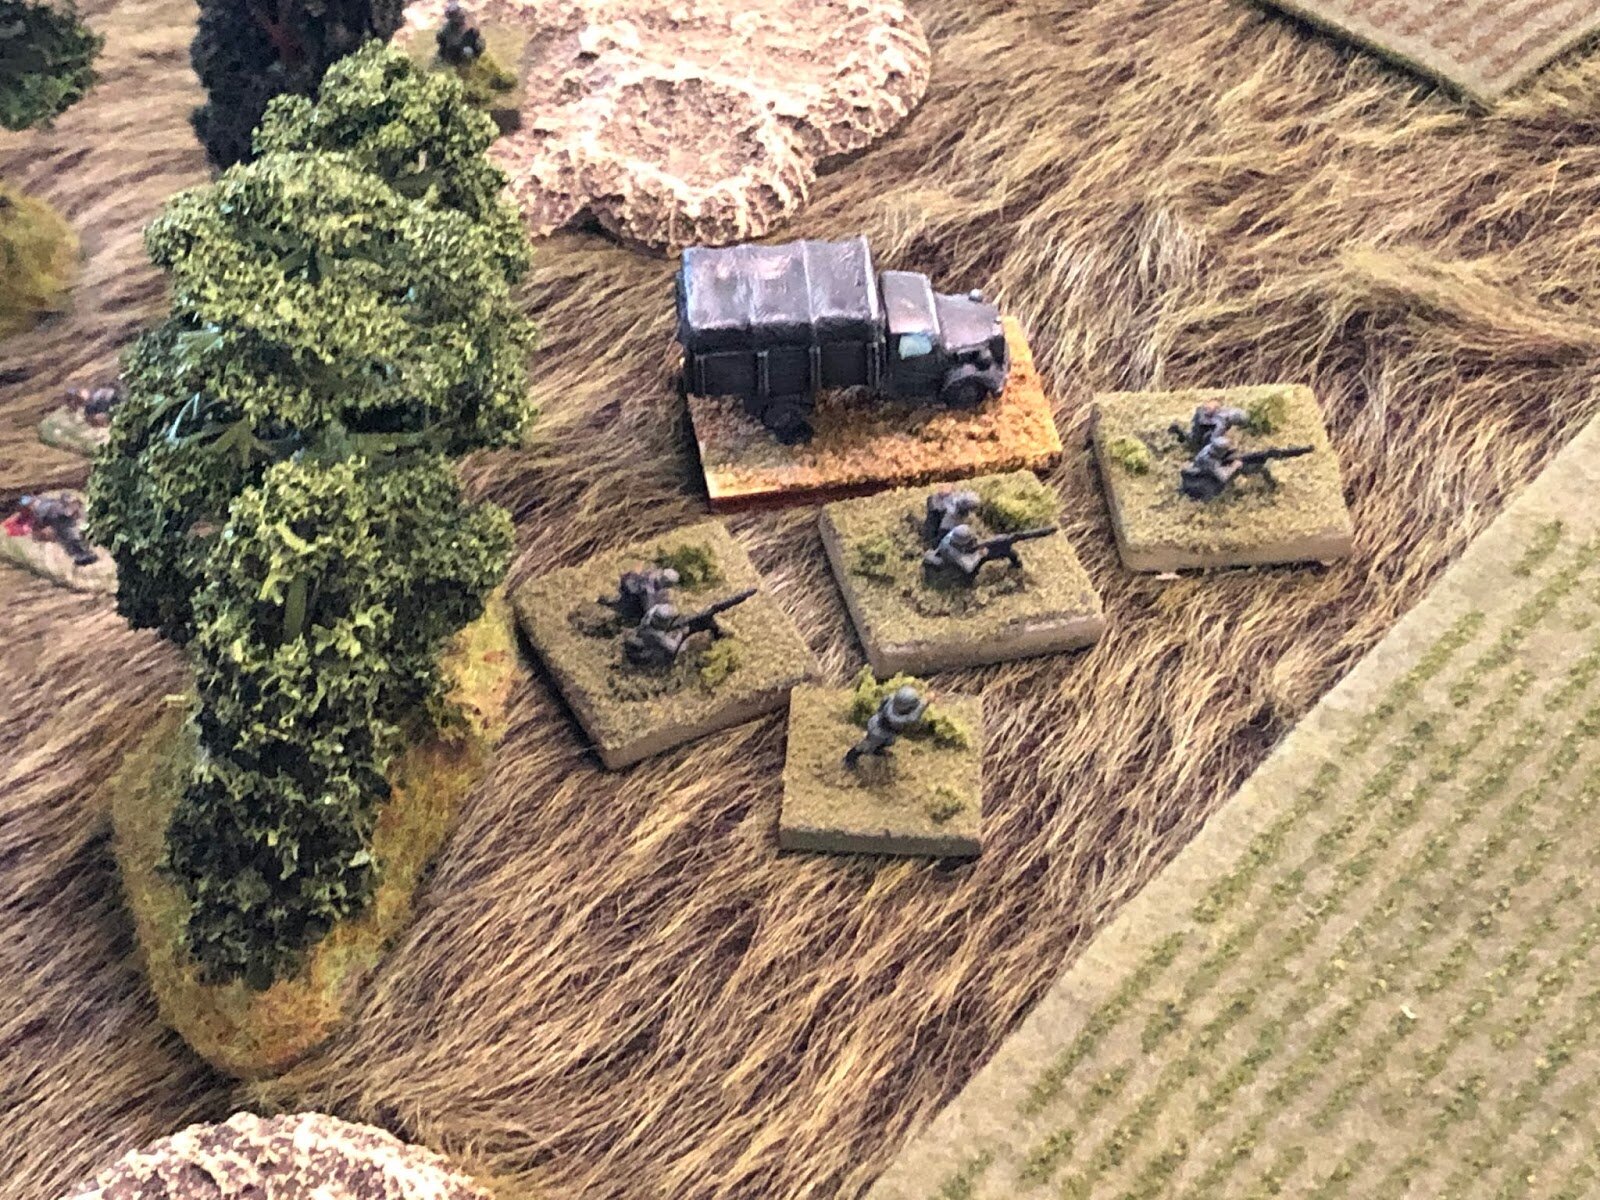  The German MG Plt loads up in its truck, ready to displace forward, up to the railway embankment.   *Yes, the Germans have not yet actually taken the southwest woods, but even they cannot help but note that they have received no fire from those posi